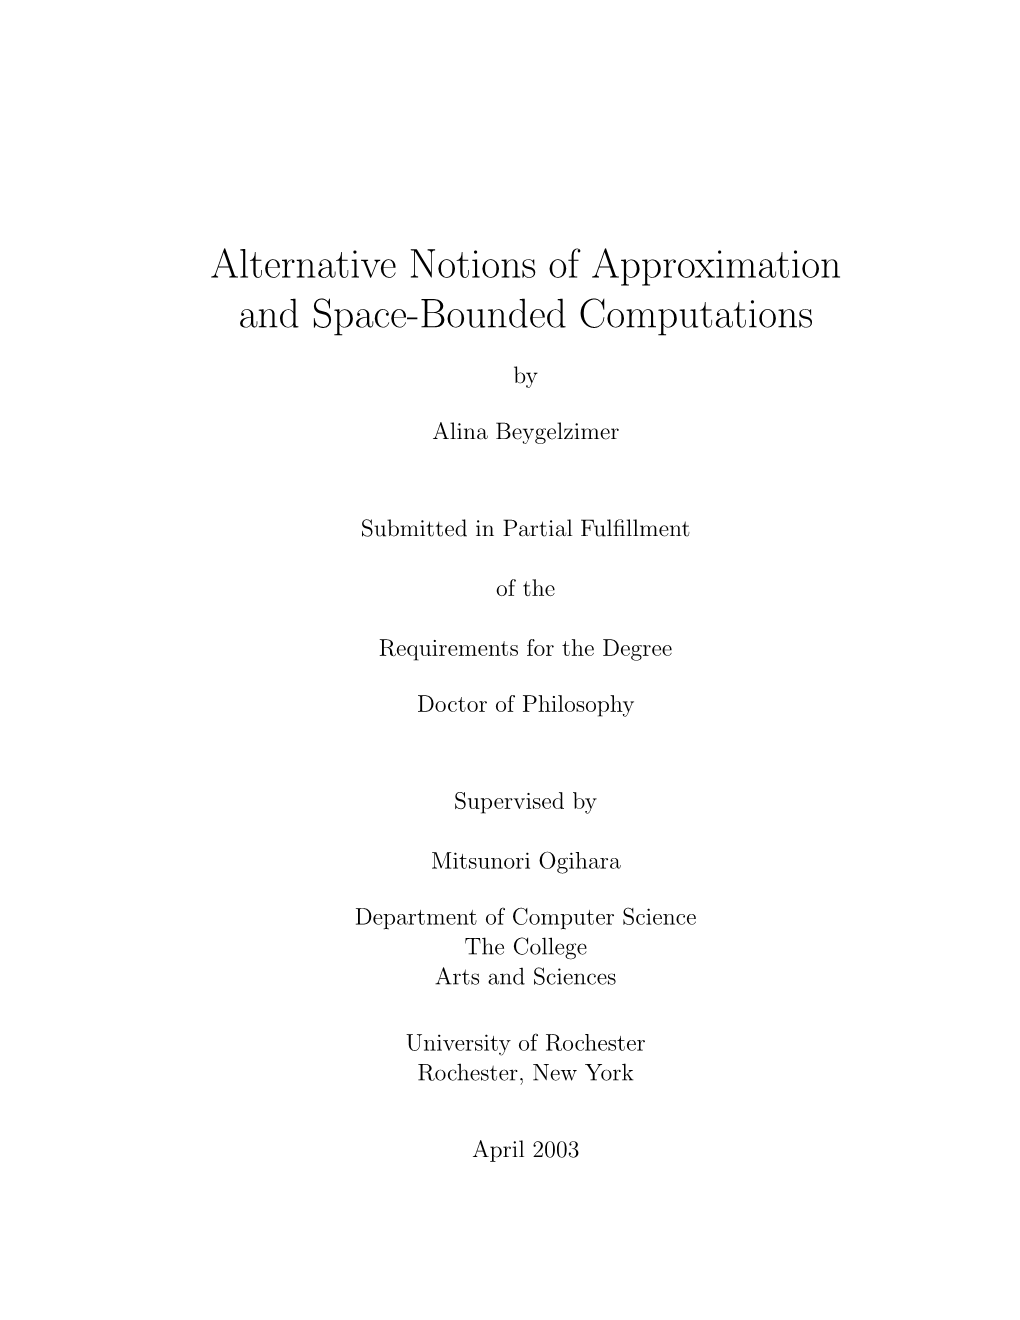 Alternative Notions of Approximation and Space-Bounded Computations